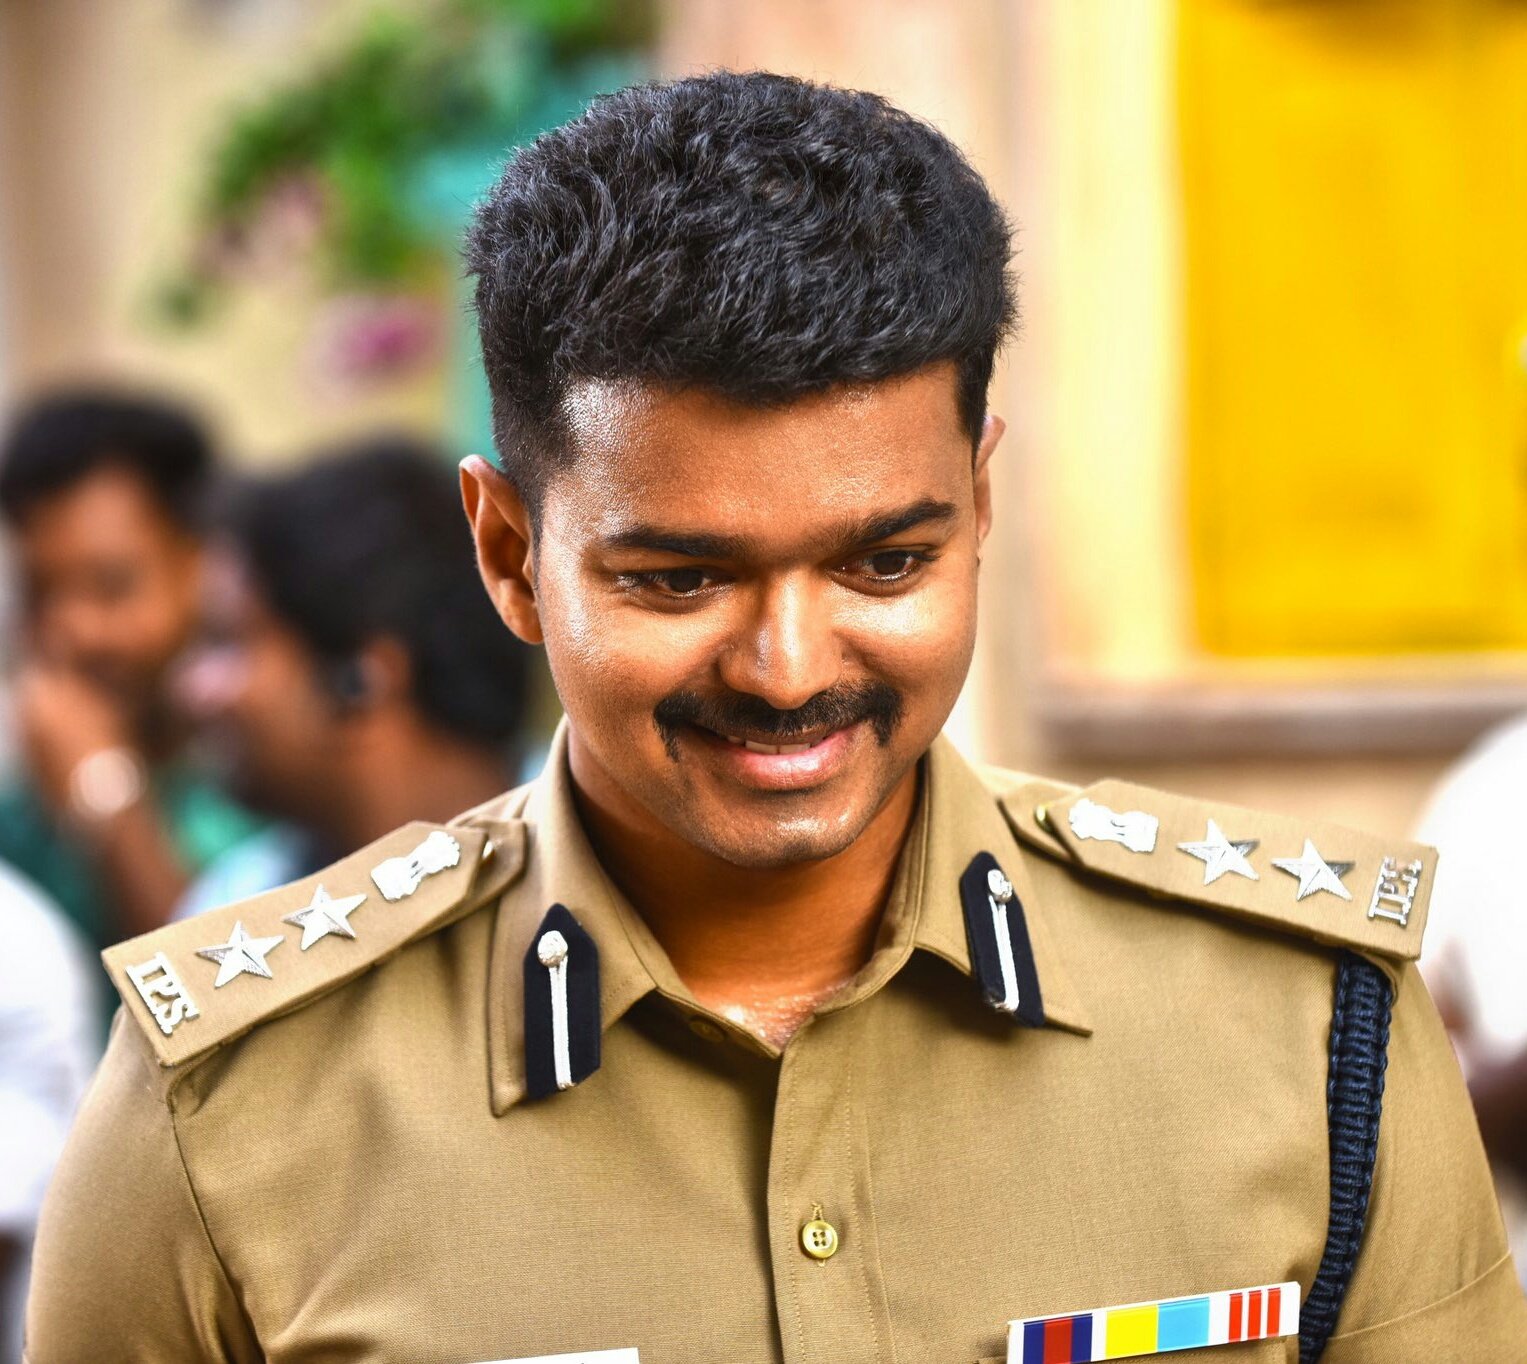 Theri is to release on April 14th